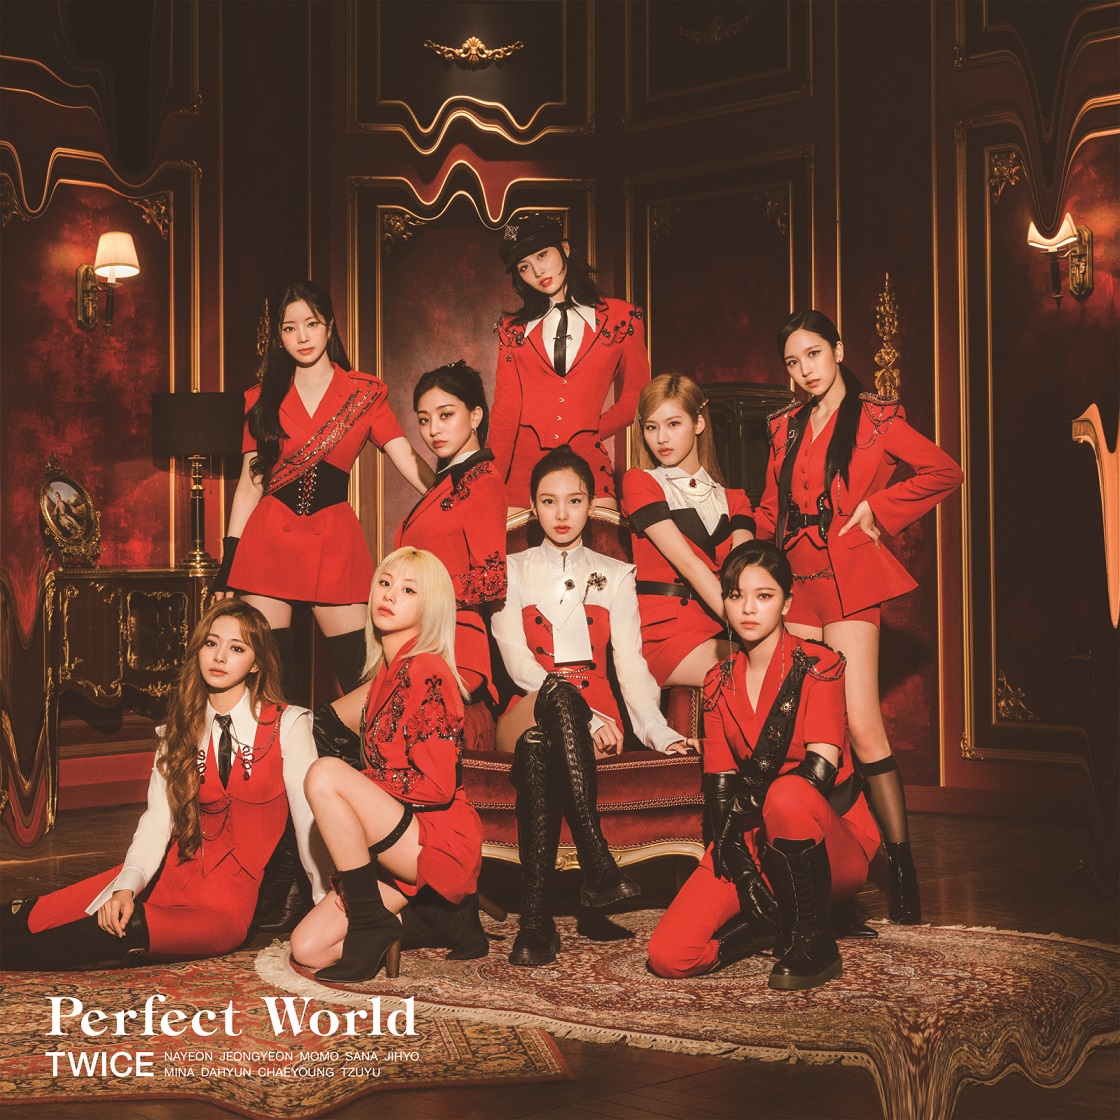 Cover for『TWICE - Perfect World』from the release『Perfect World』